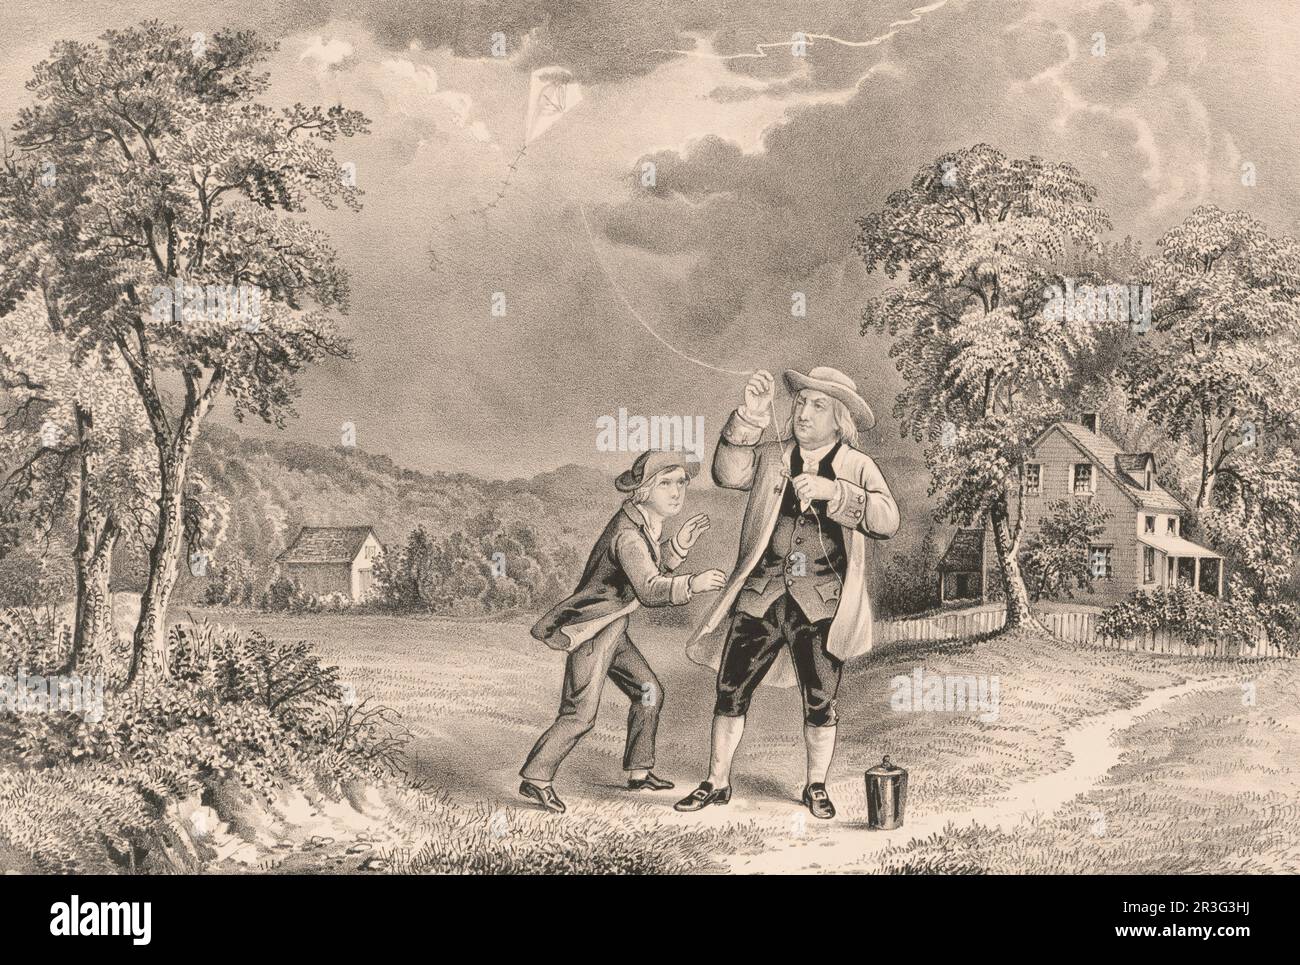 Franklin's experiment, June 1752, demonstrating the identity of lightning and electricty. Stock Photo